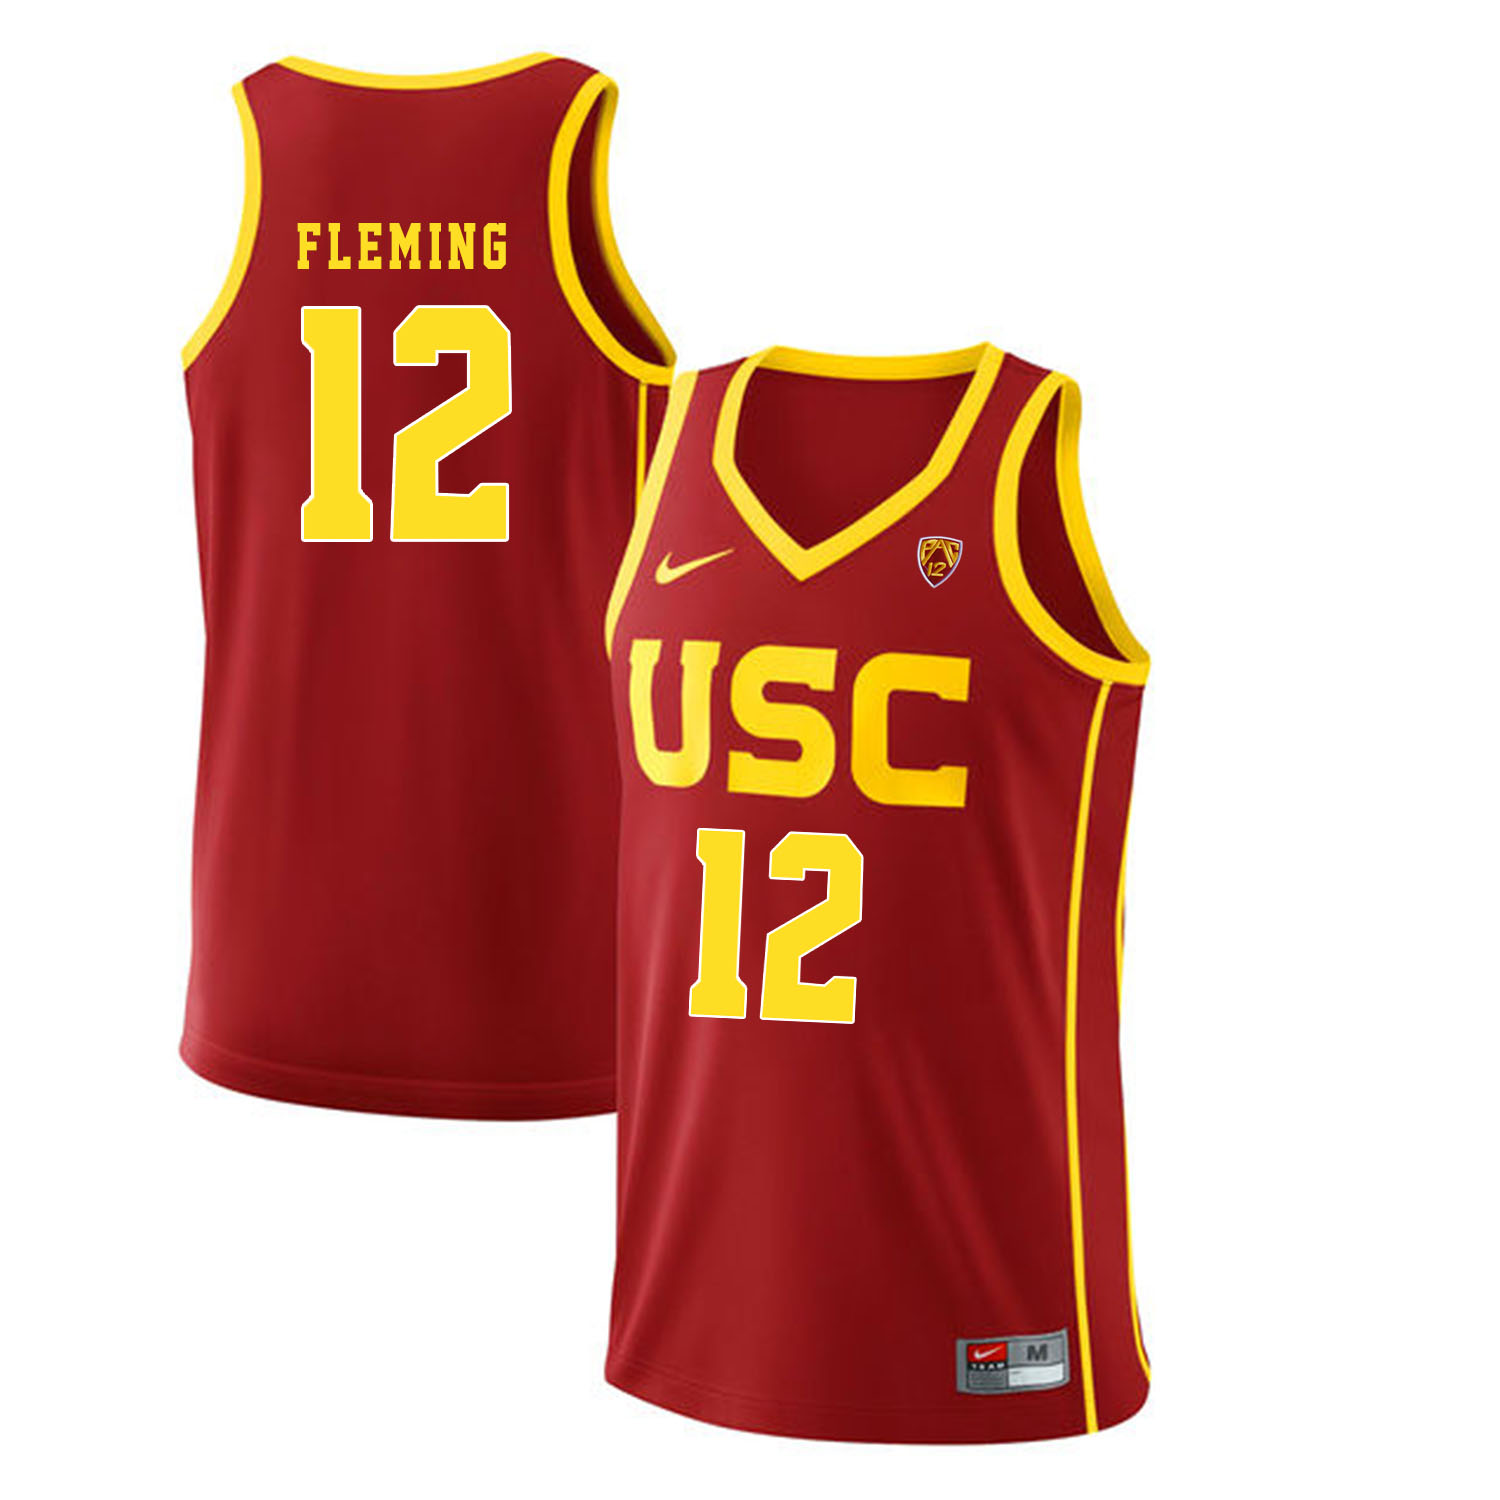 USC Trojans 12 Devin Fleming Red College Basketball Jersey